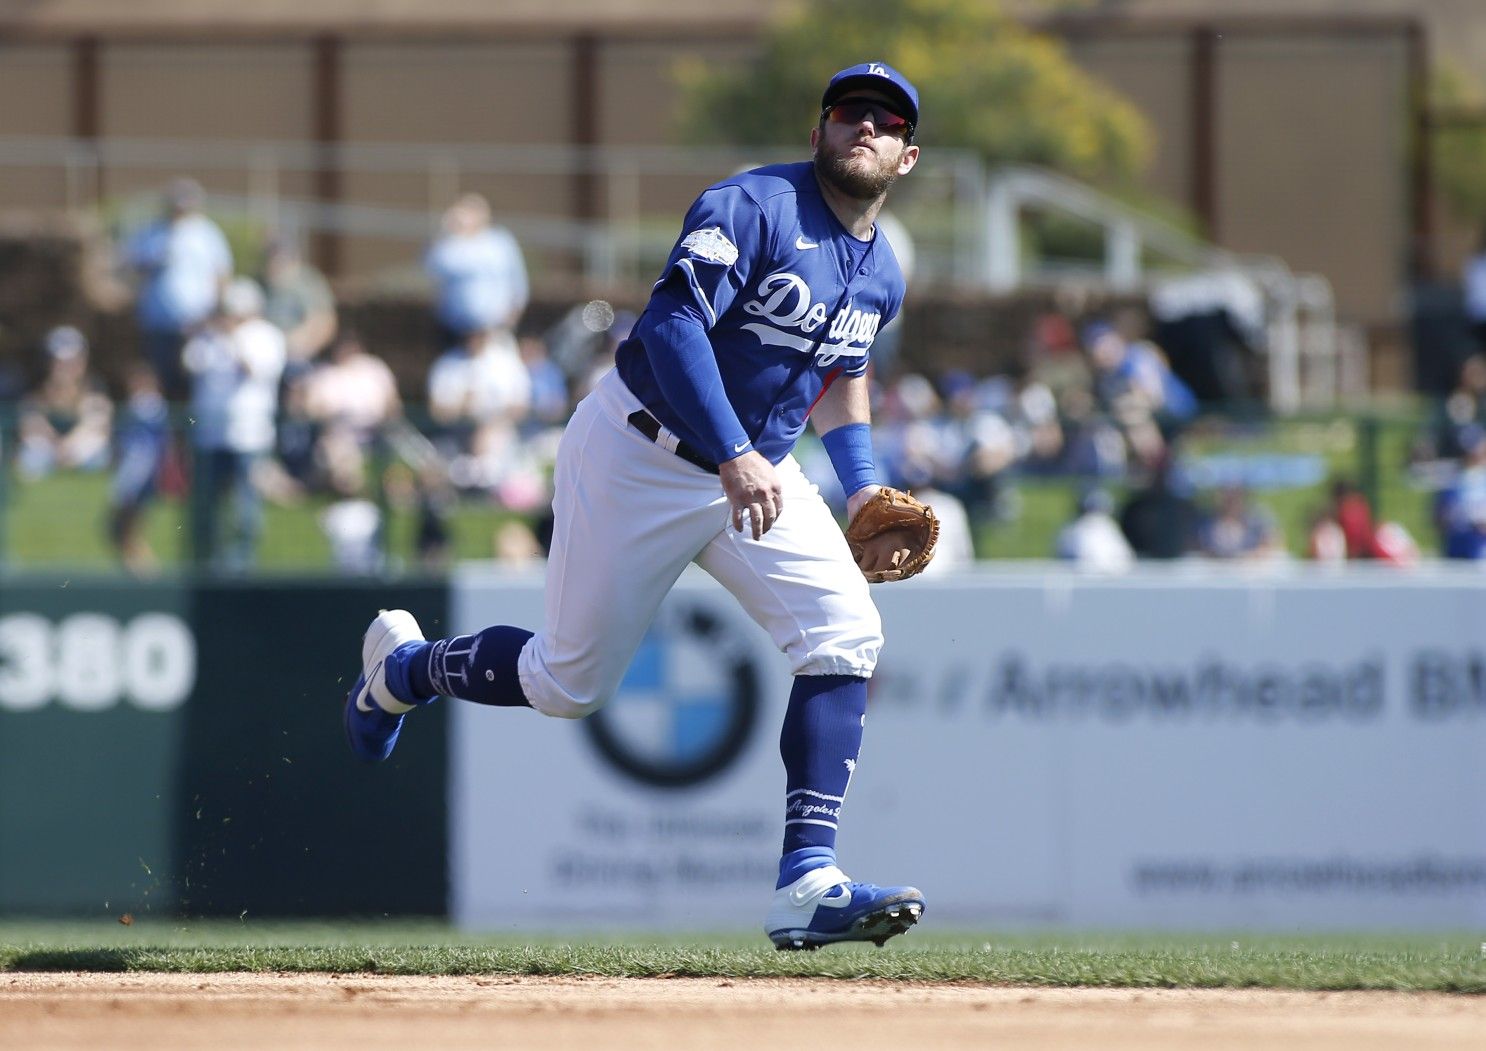 Dodgers slugger Max Muncy stays humble despite new contract